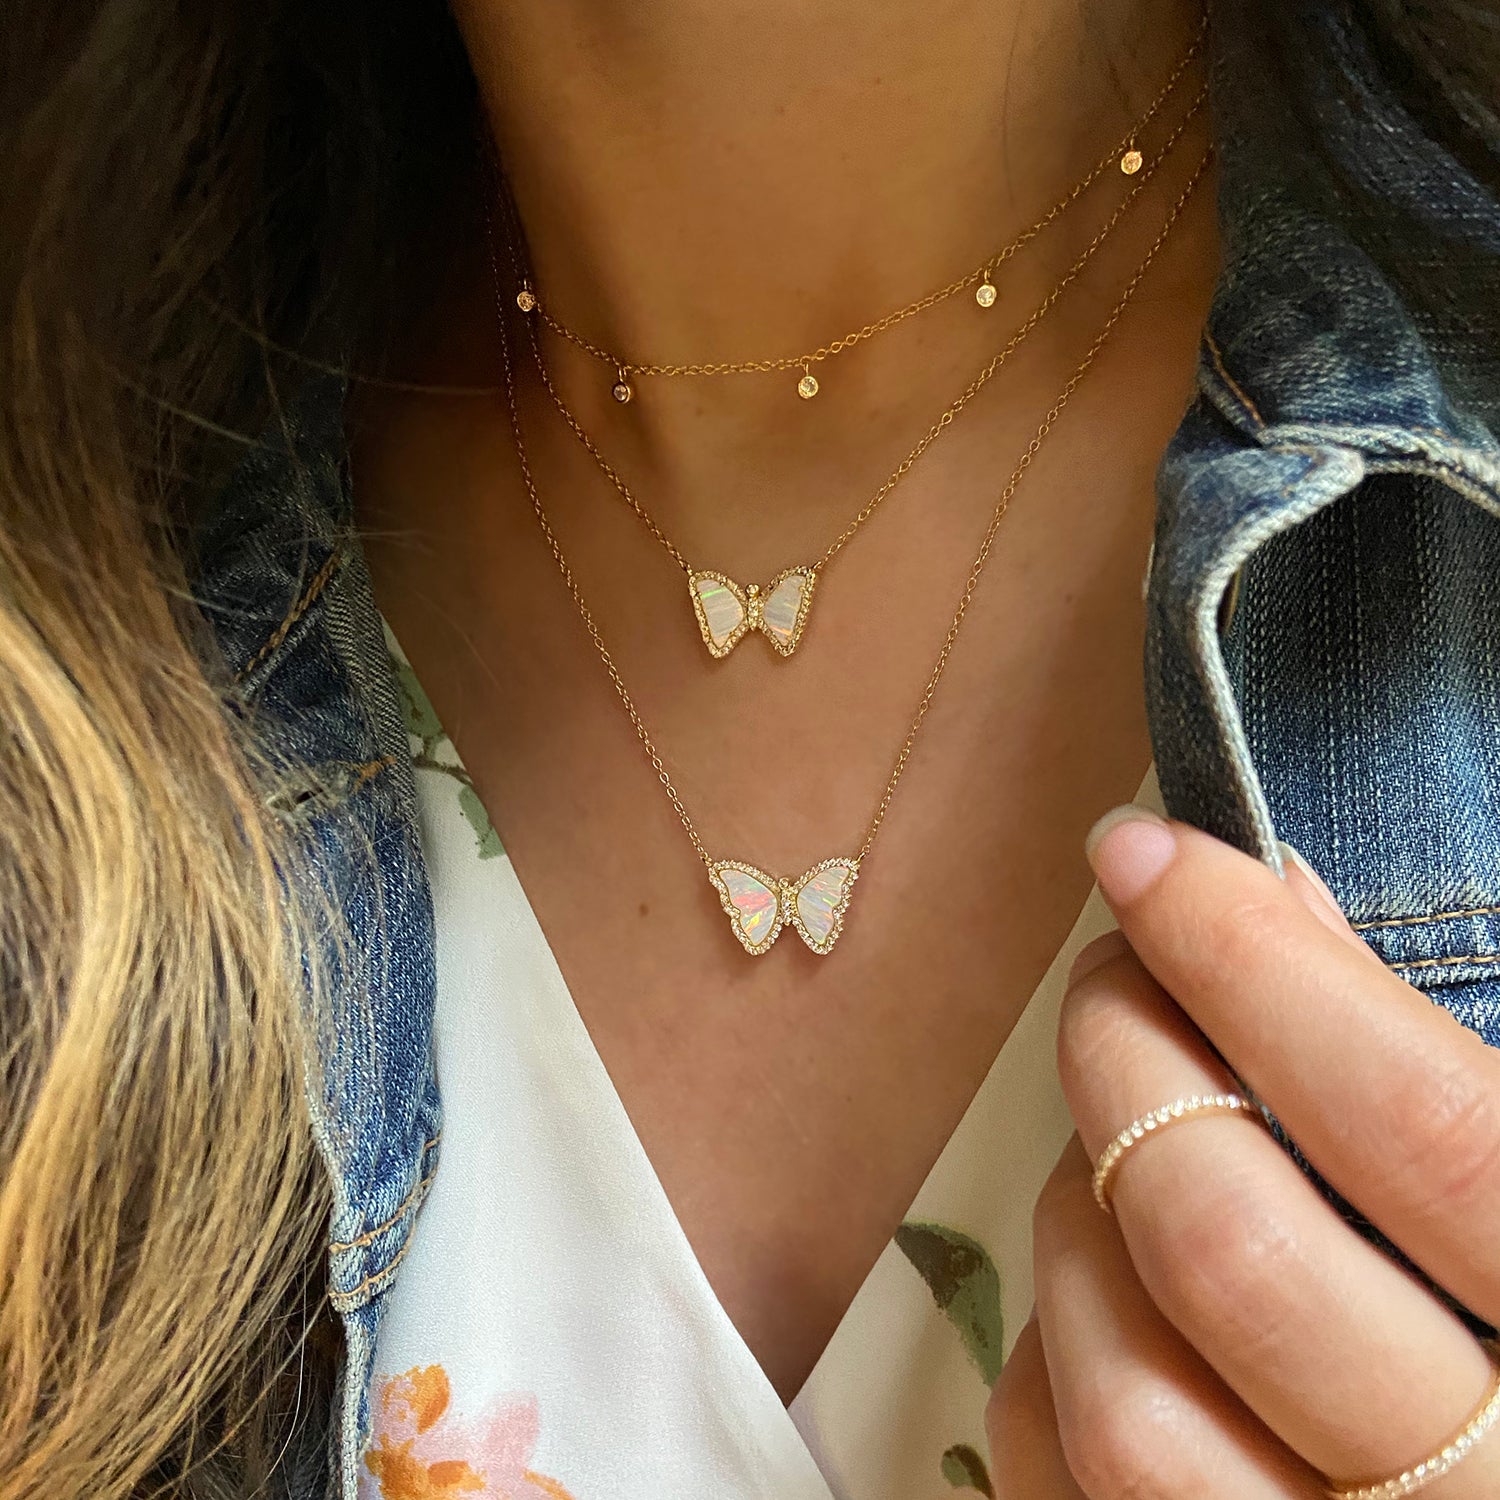 Butterfly Opal White With Stripes Necklace in Gold